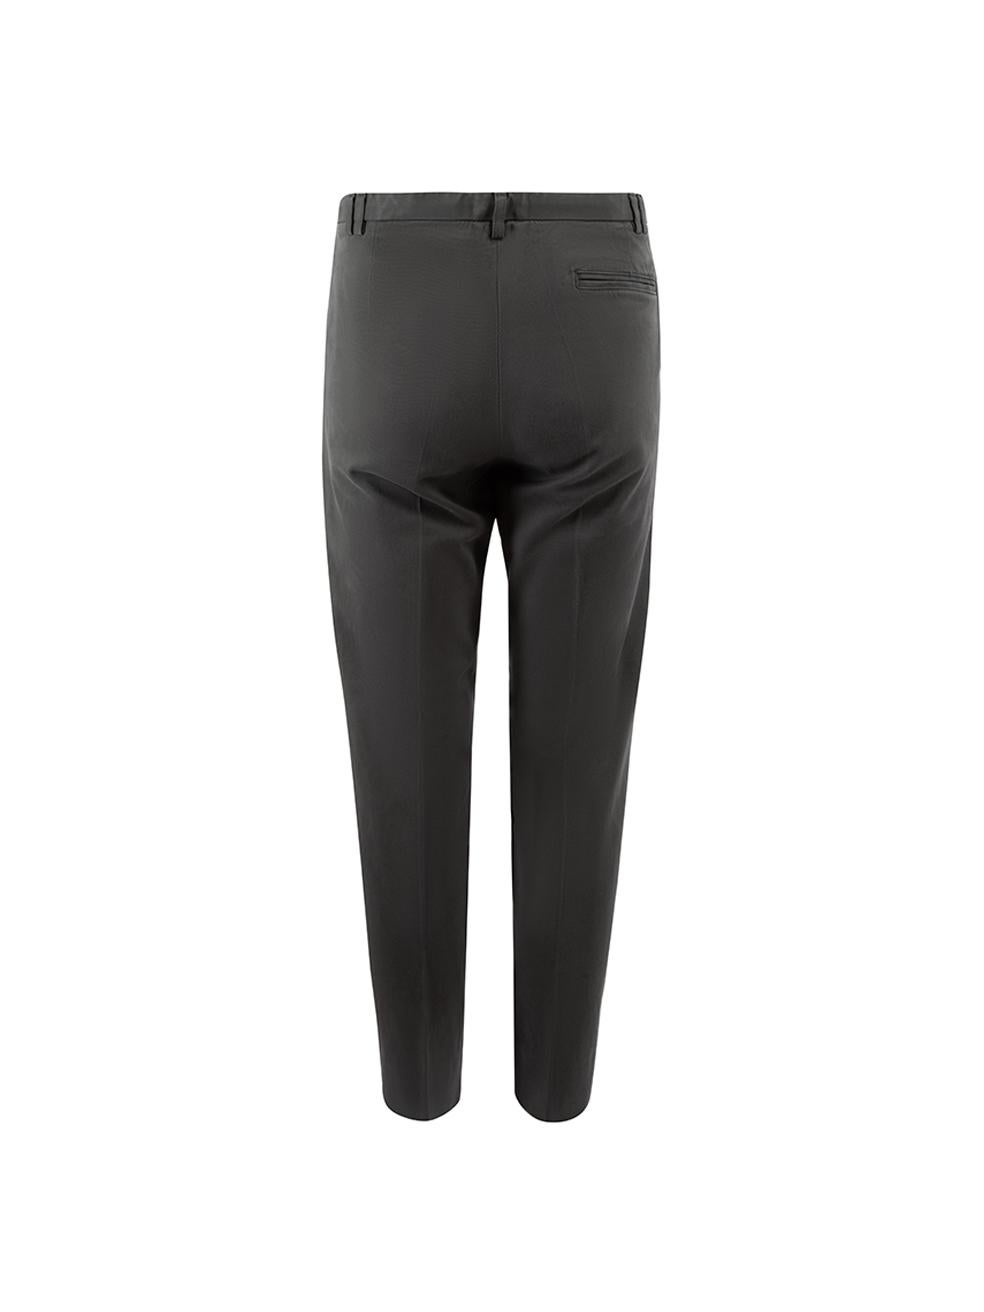 Fabiana Filippi Grey Mid Rise Tapered Trousers Size XS In Good Condition For Sale In London, GB